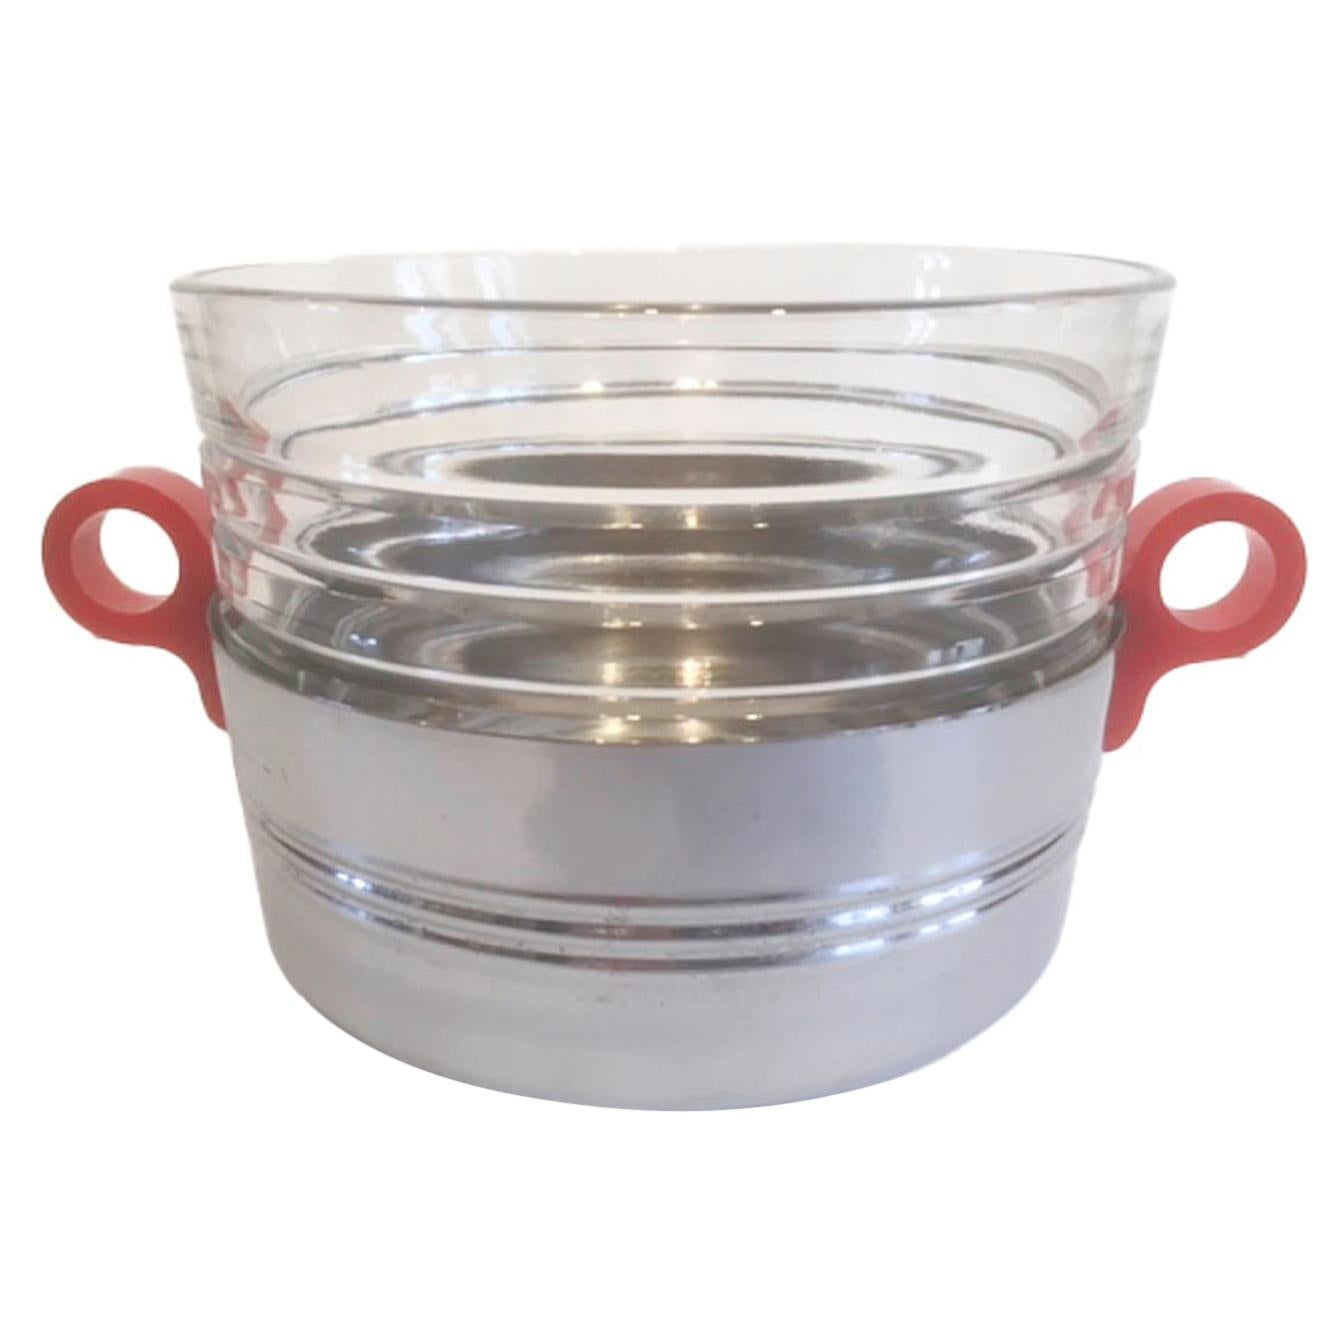 Art Deco Ice Bowl, Chrome with Red Bakelite Handles and Ribbed Glass Liner